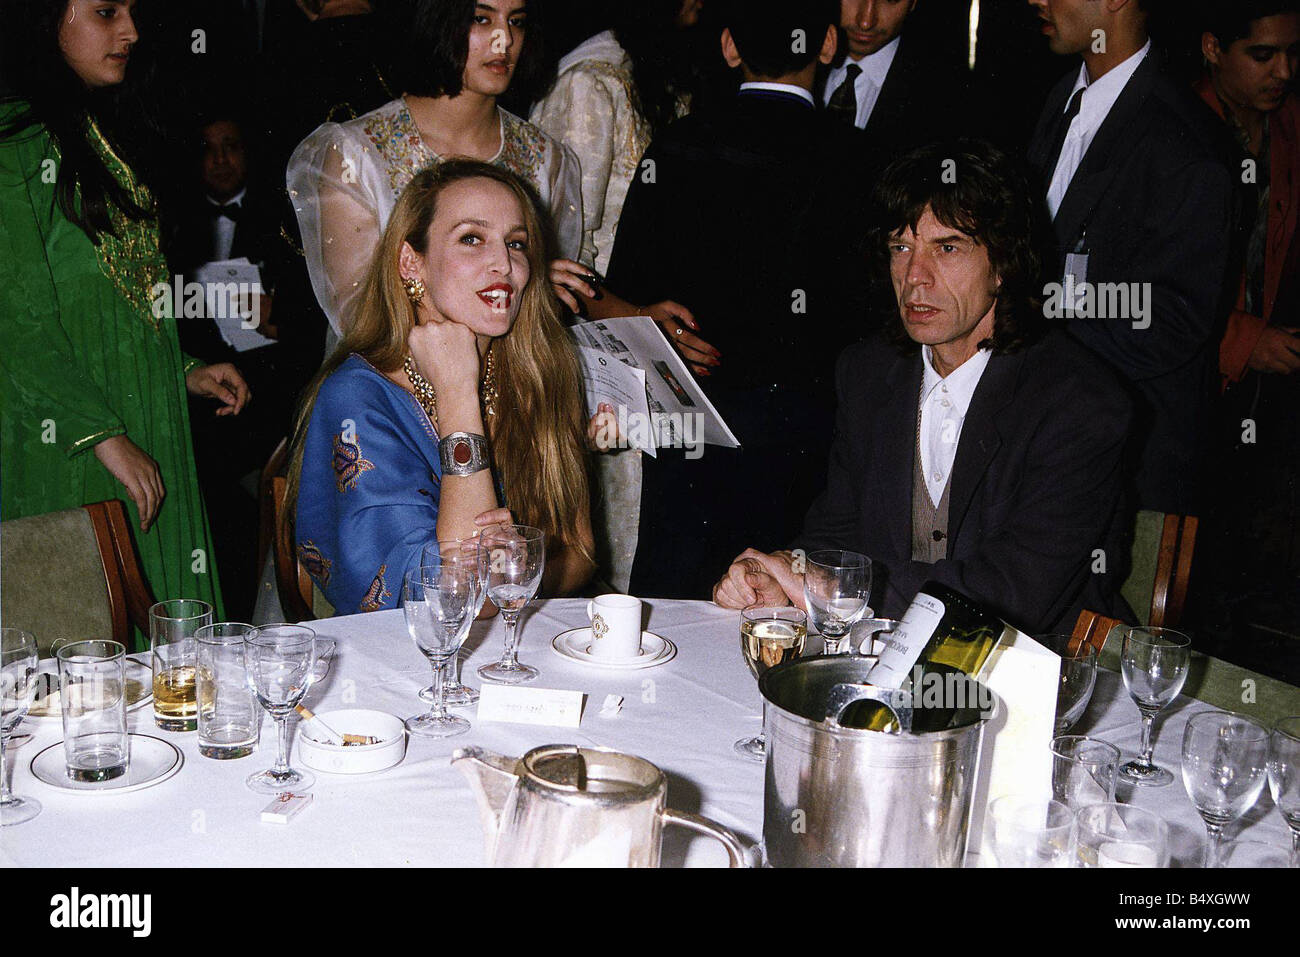 Mick Jagger Singer with wife Jerry Hall sitting at table a gala night Stock Photo